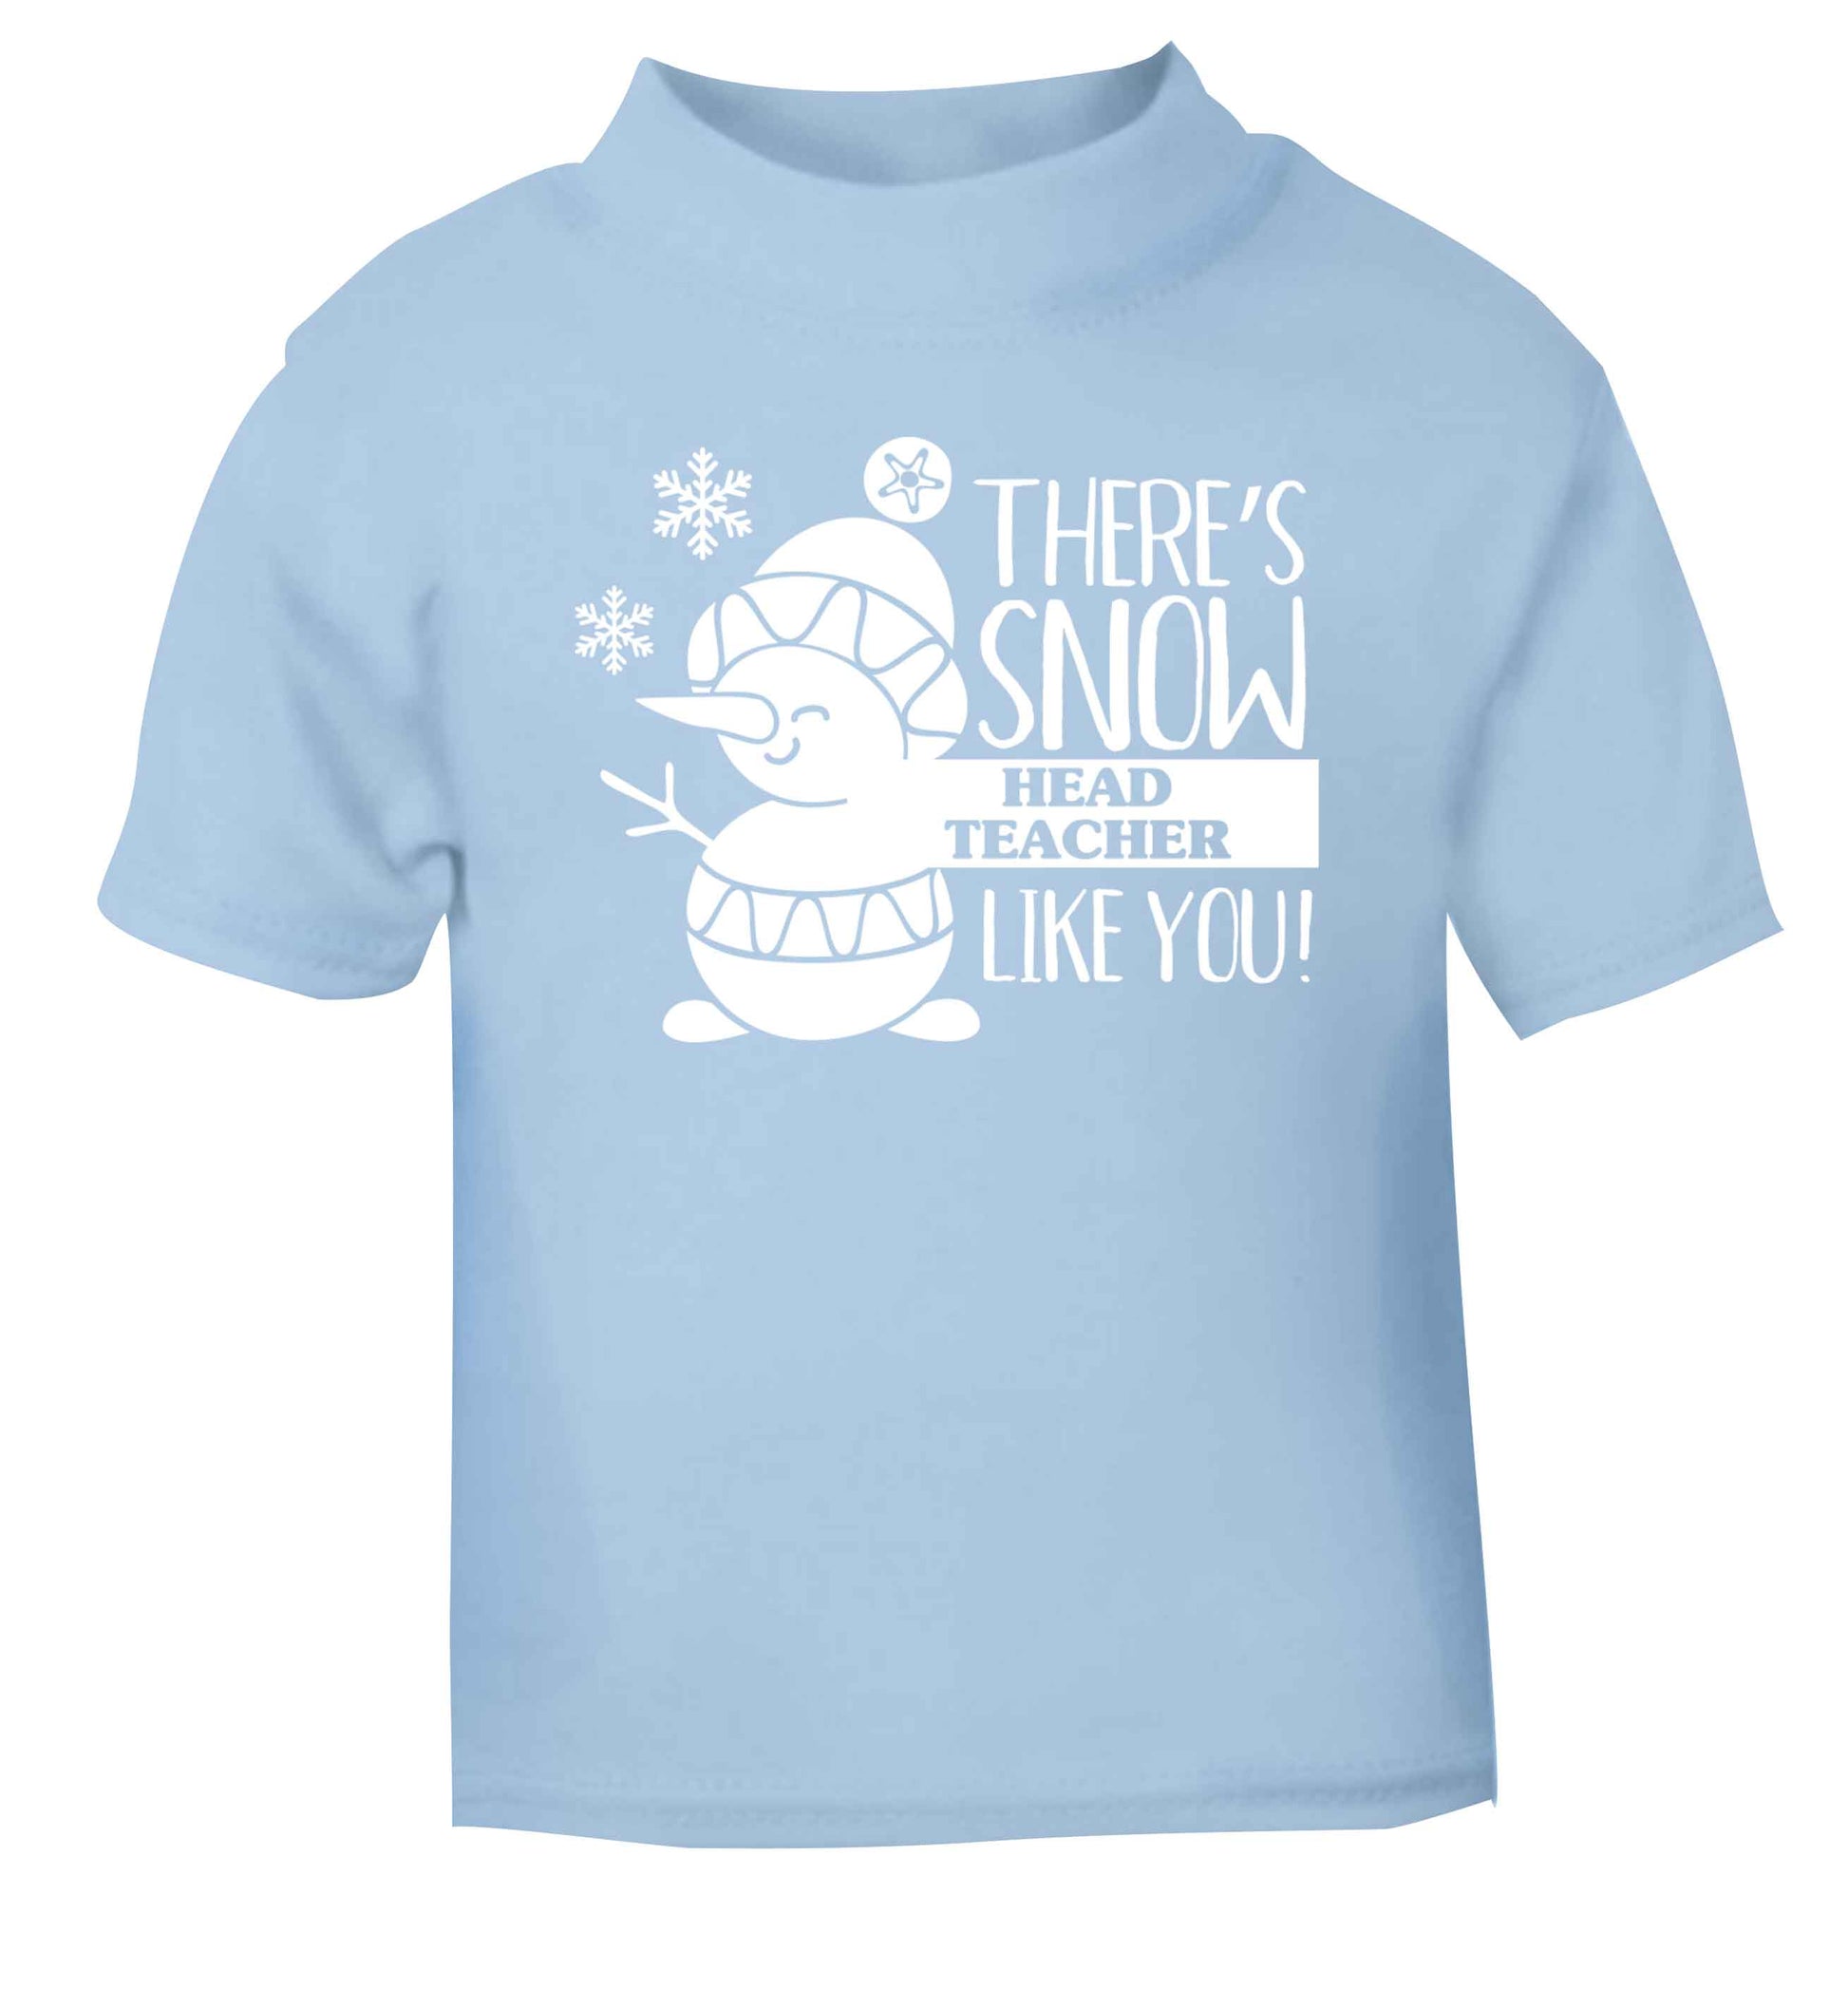 There's snow head teacher like you light blue baby toddler Tshirt 2 Years